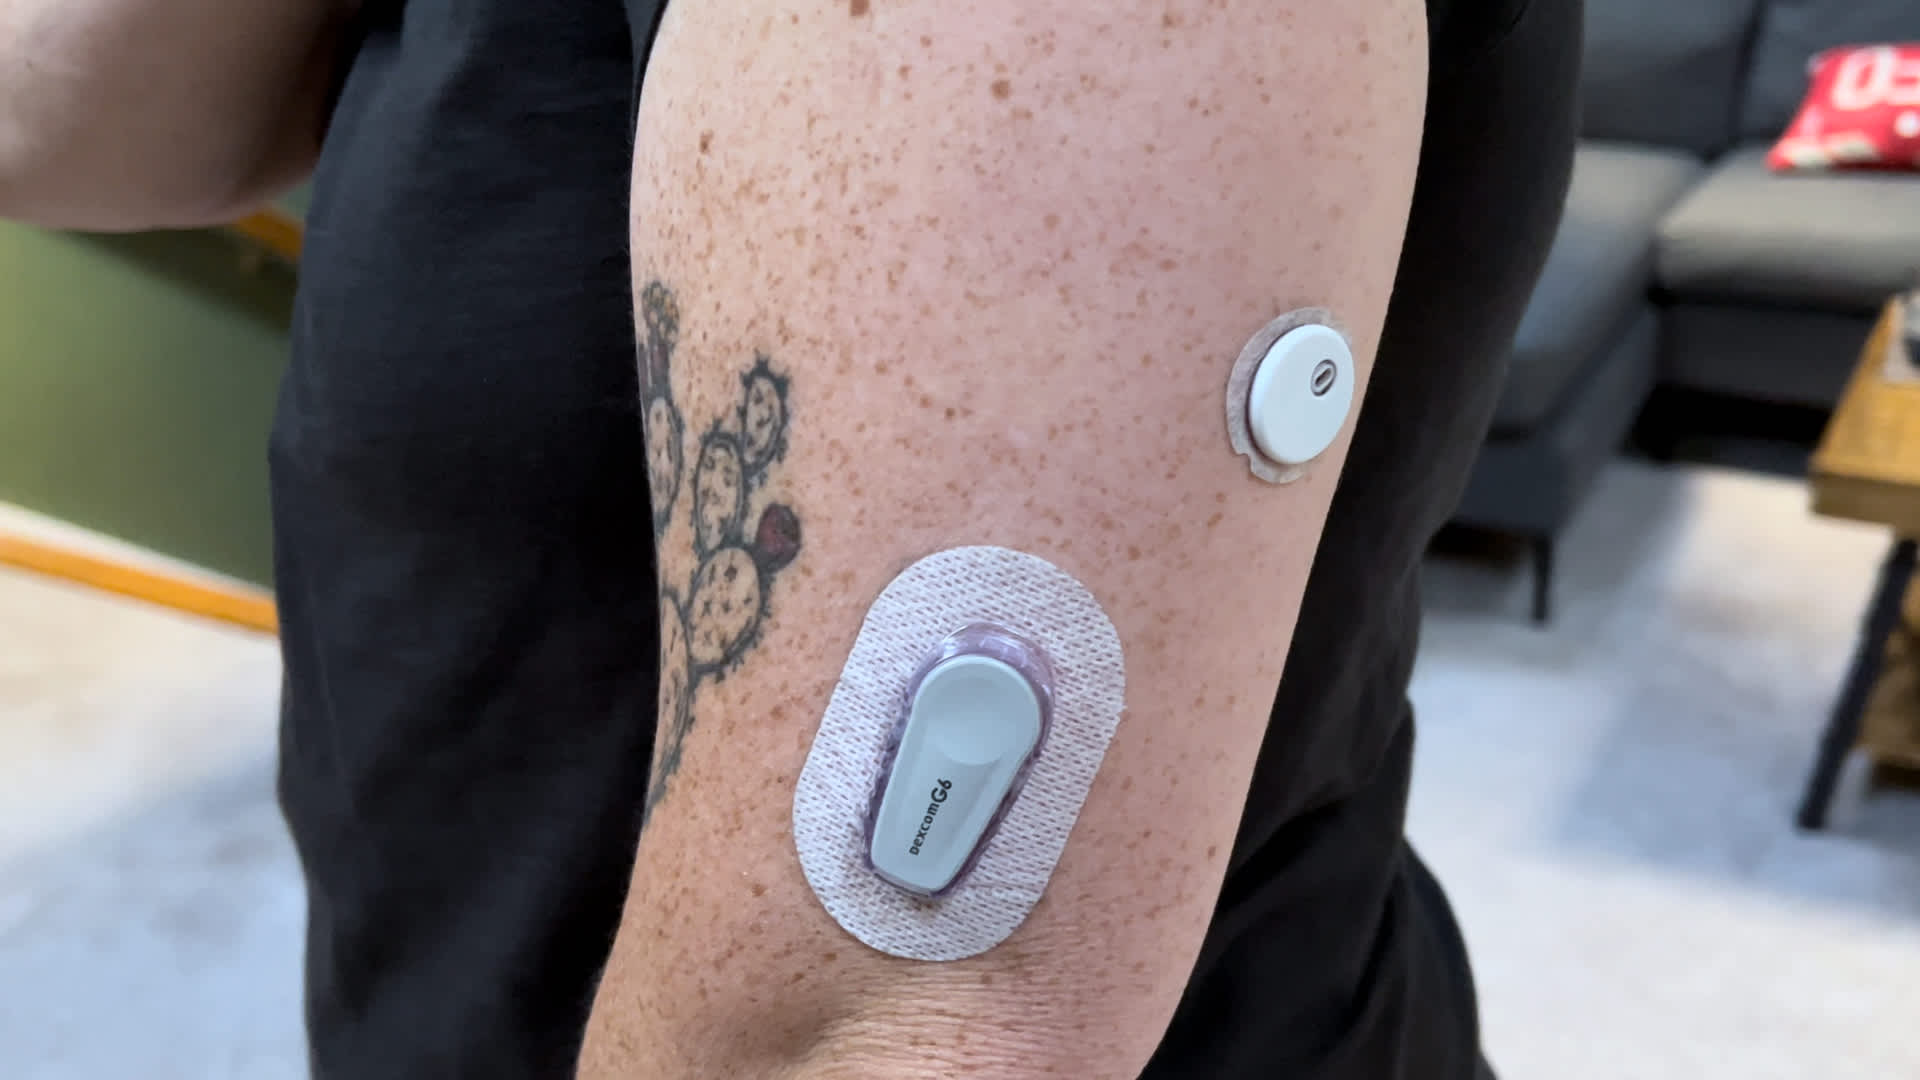 Dexcom announces Stelo has been cleared by the FDA